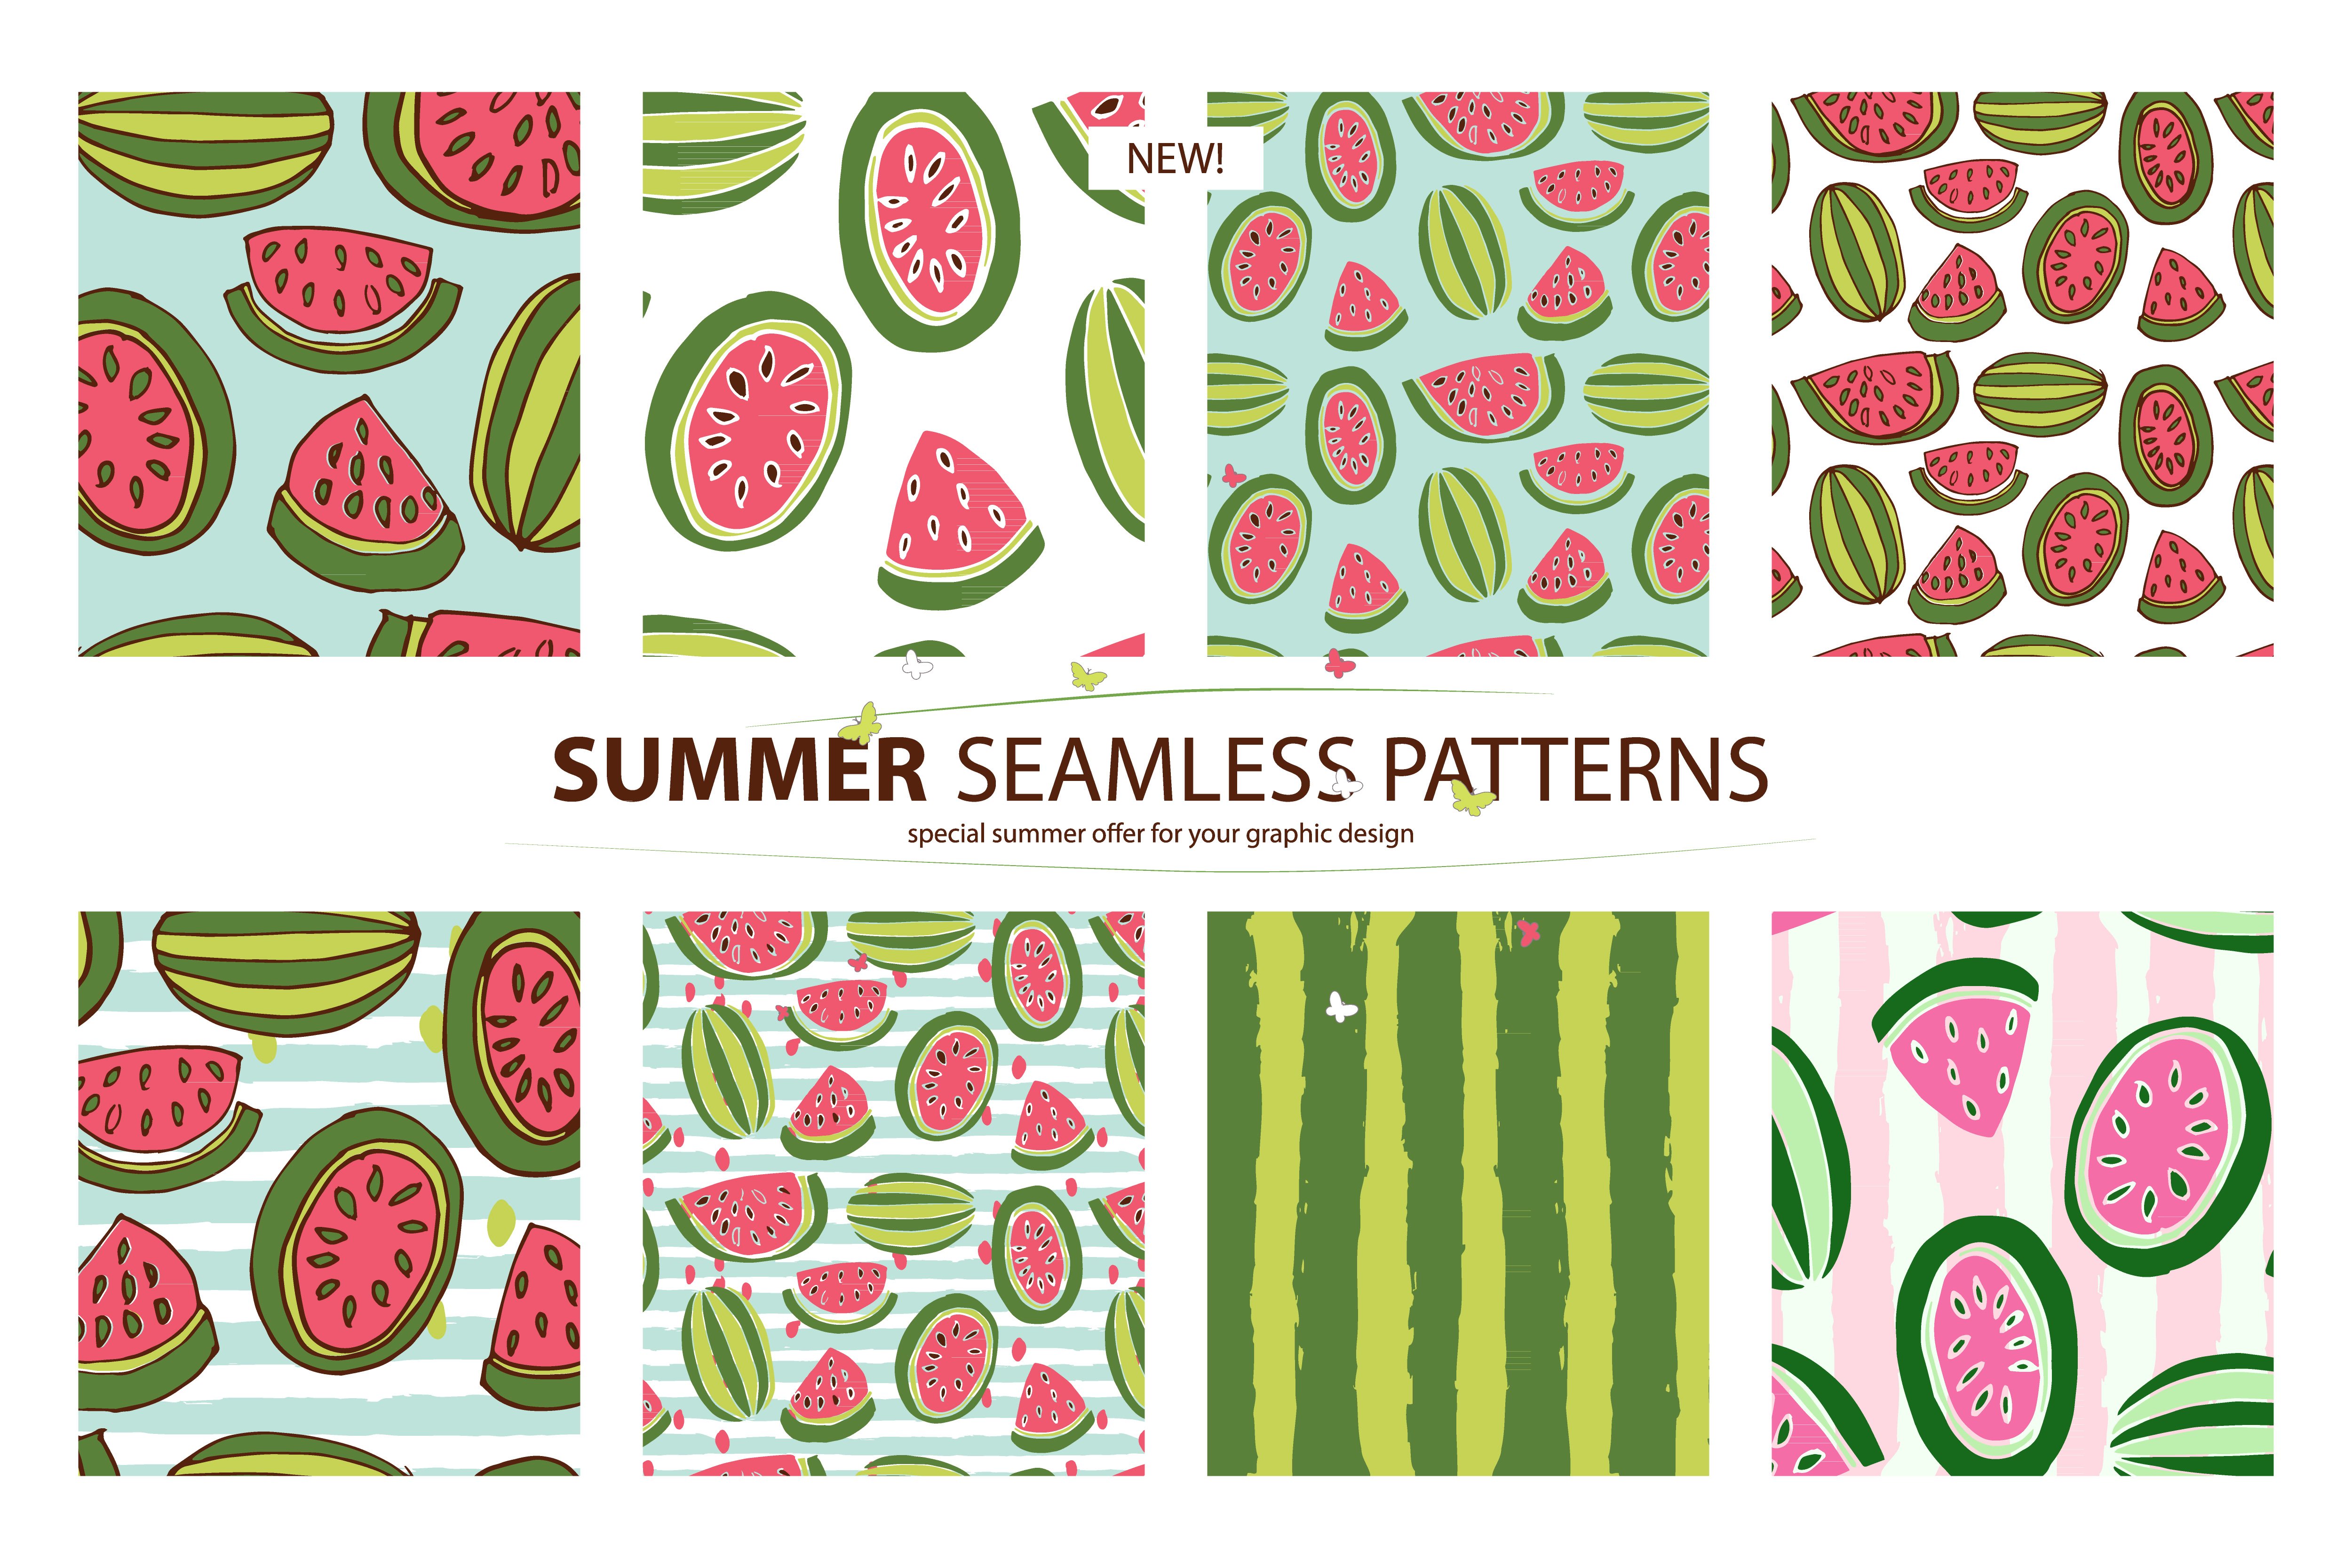 NEW! 8 Watermelon summer patterns! cover image.